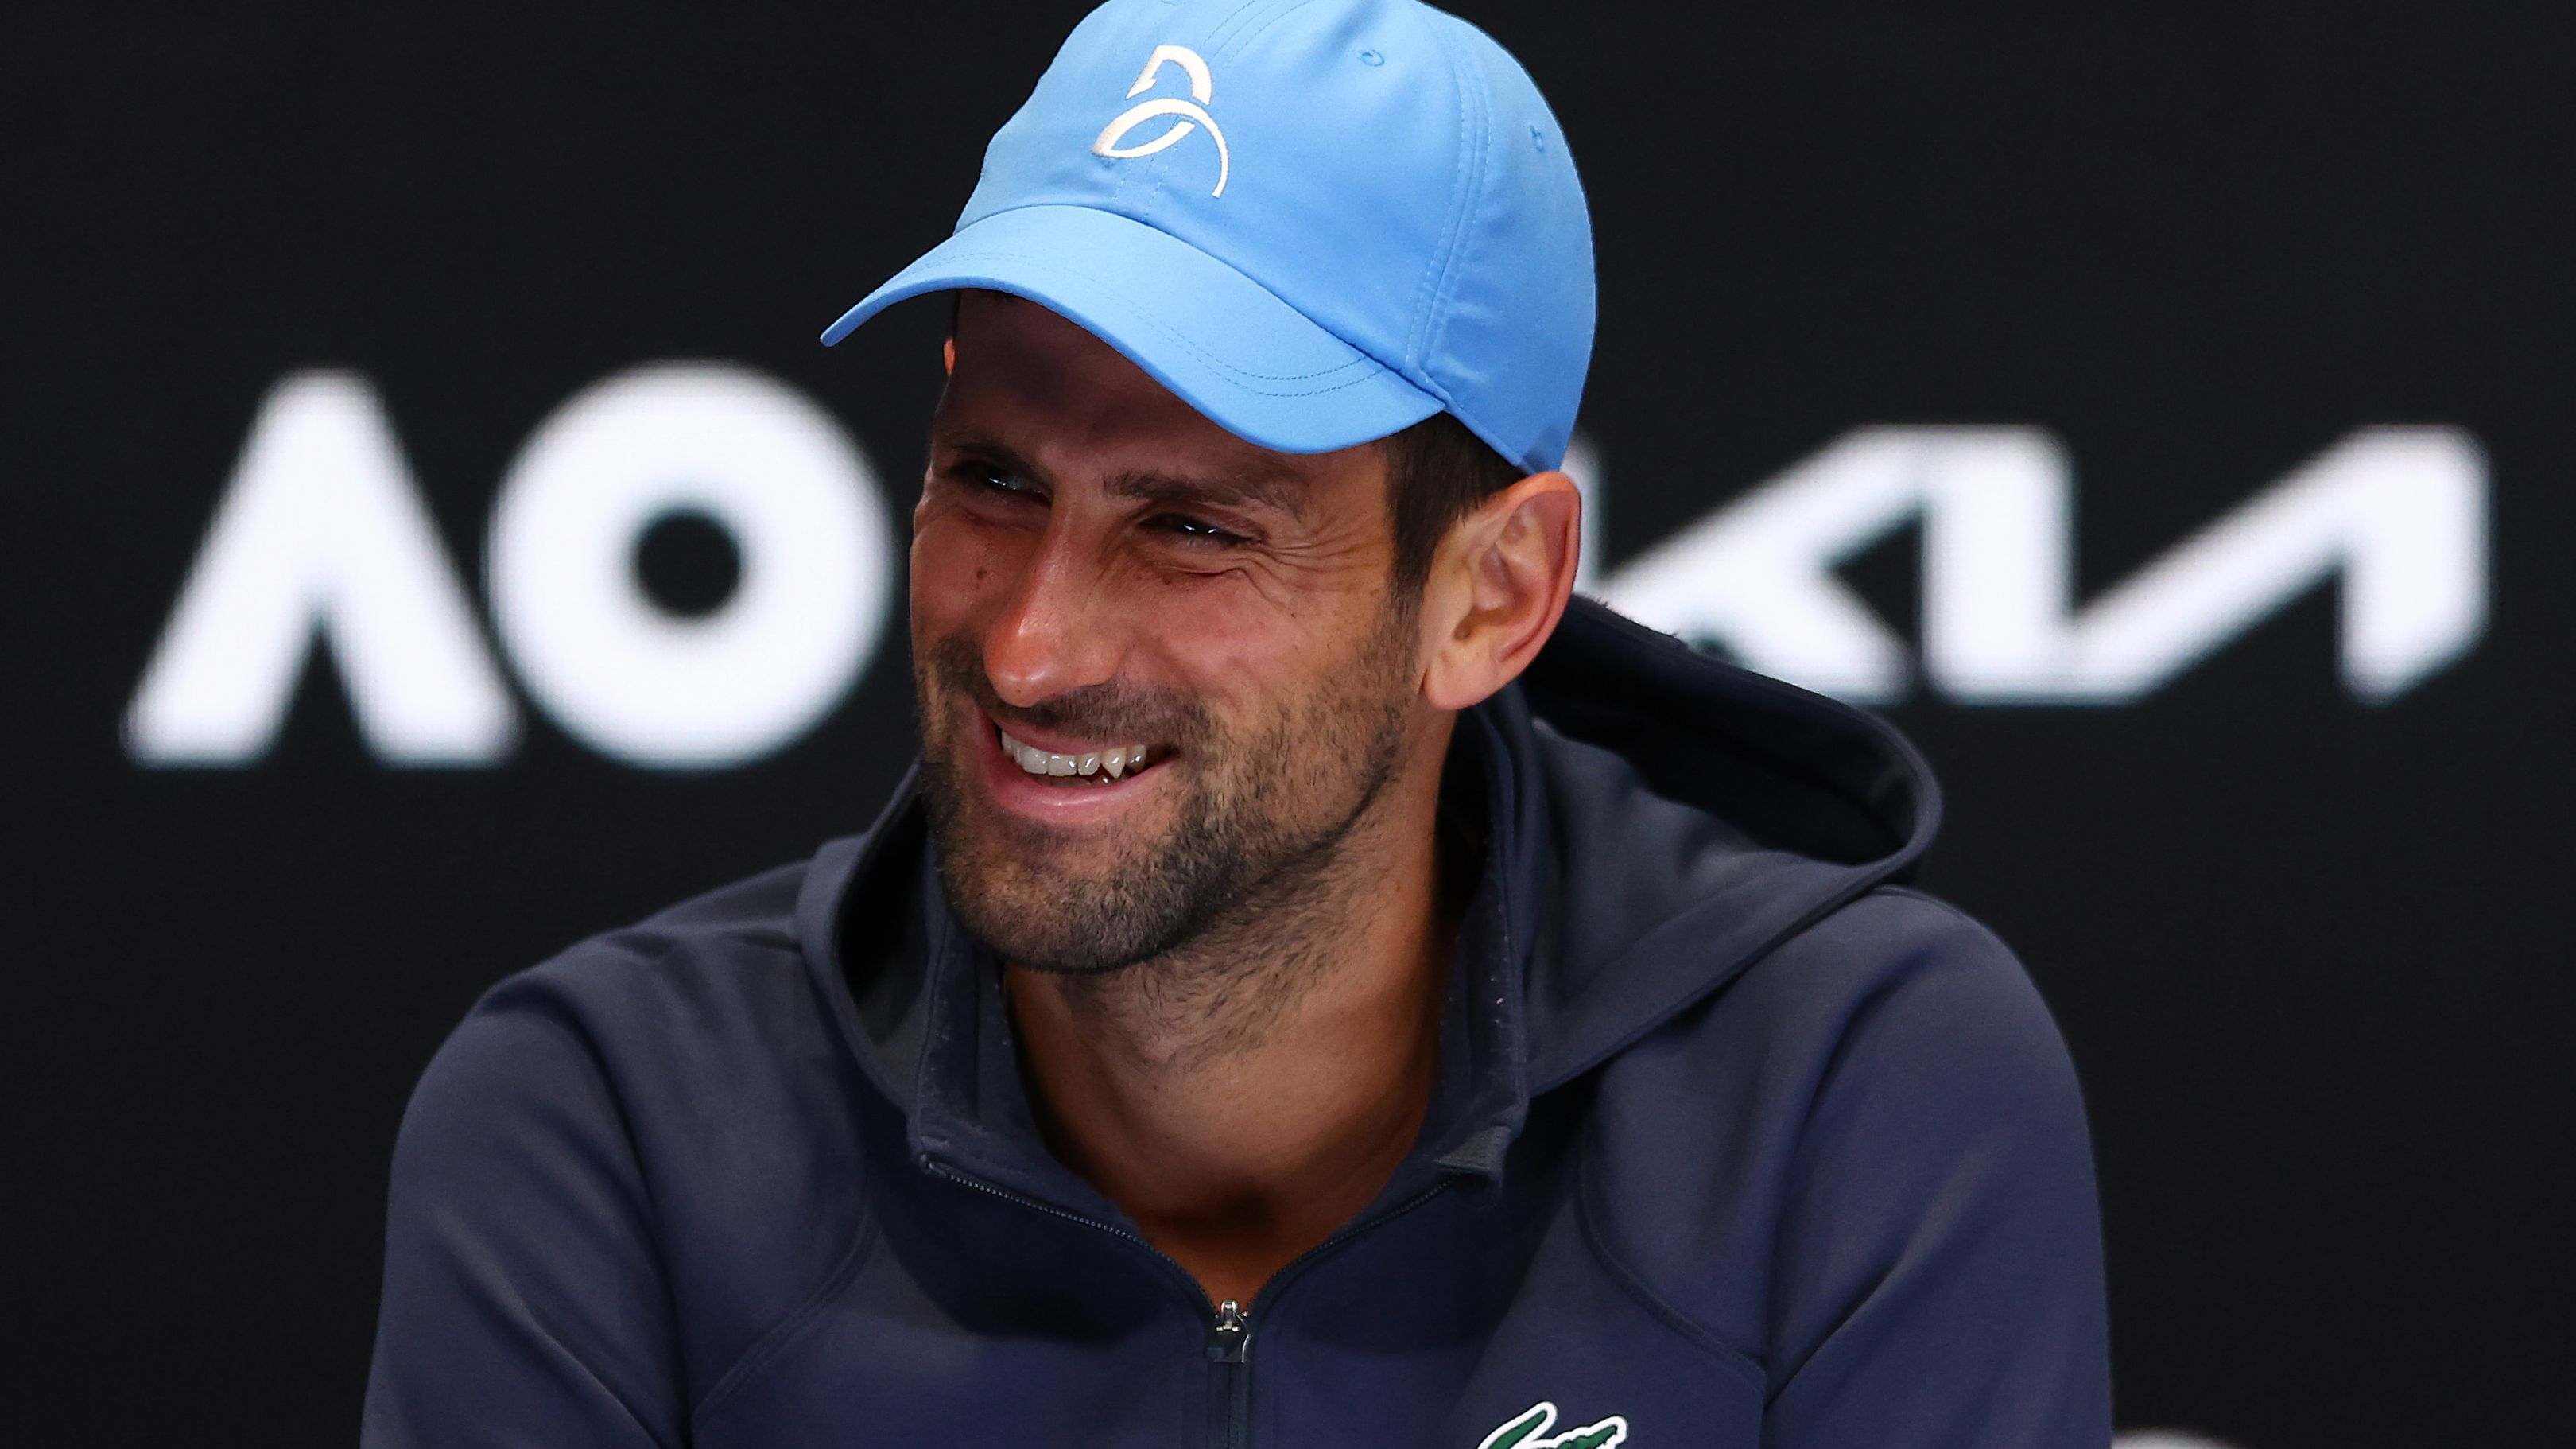 Novak Djokovic is vying for another Australian Open title.